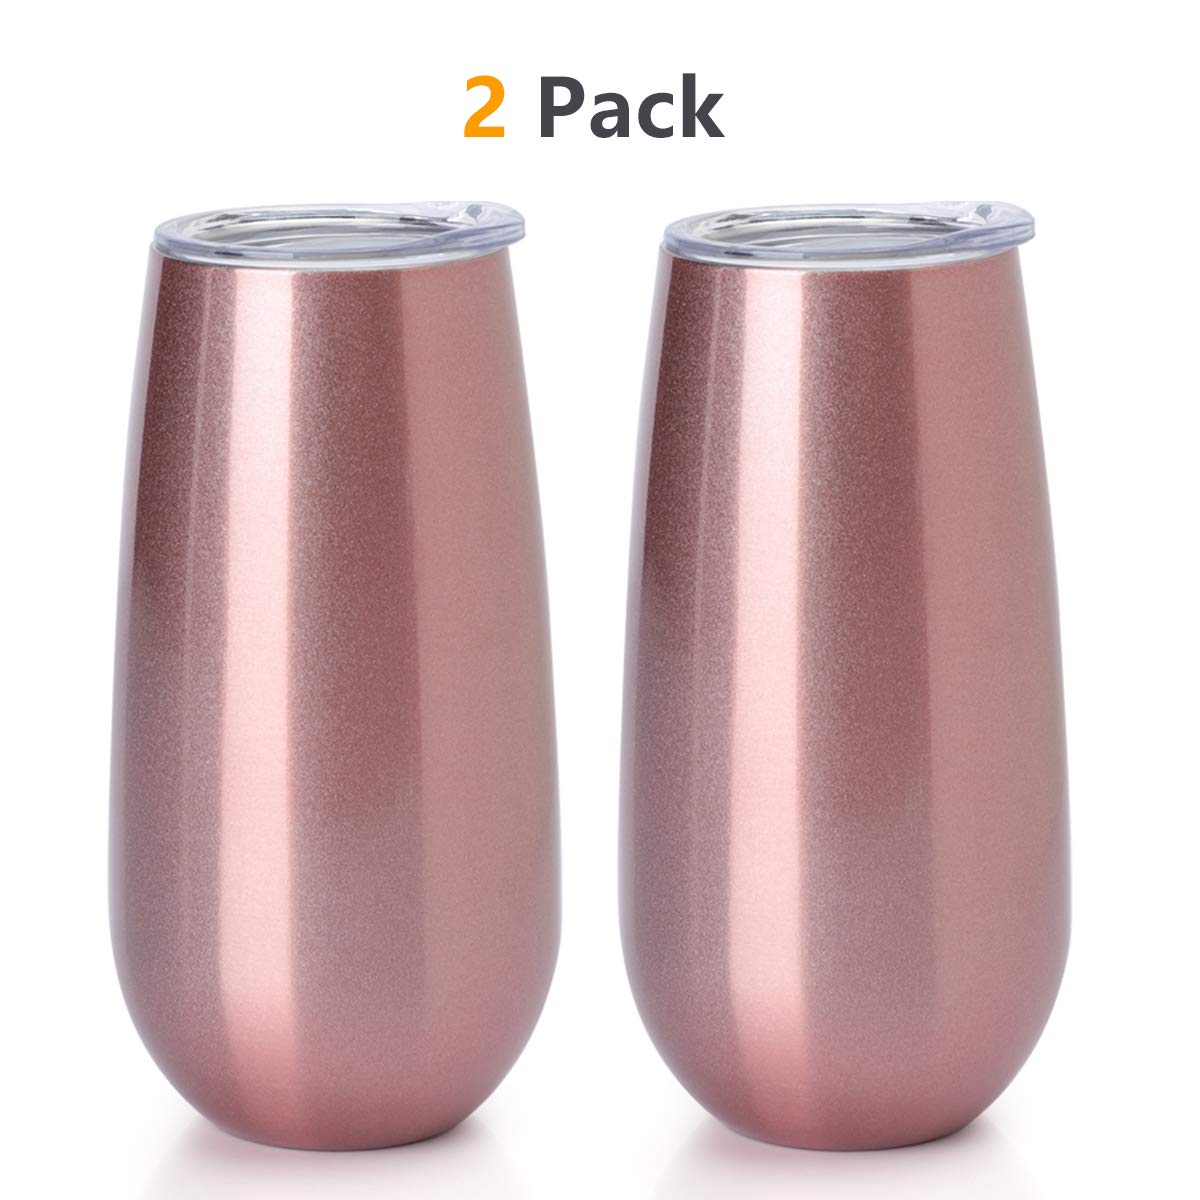 9. COMOOO Insulated Stainless Steel Cups